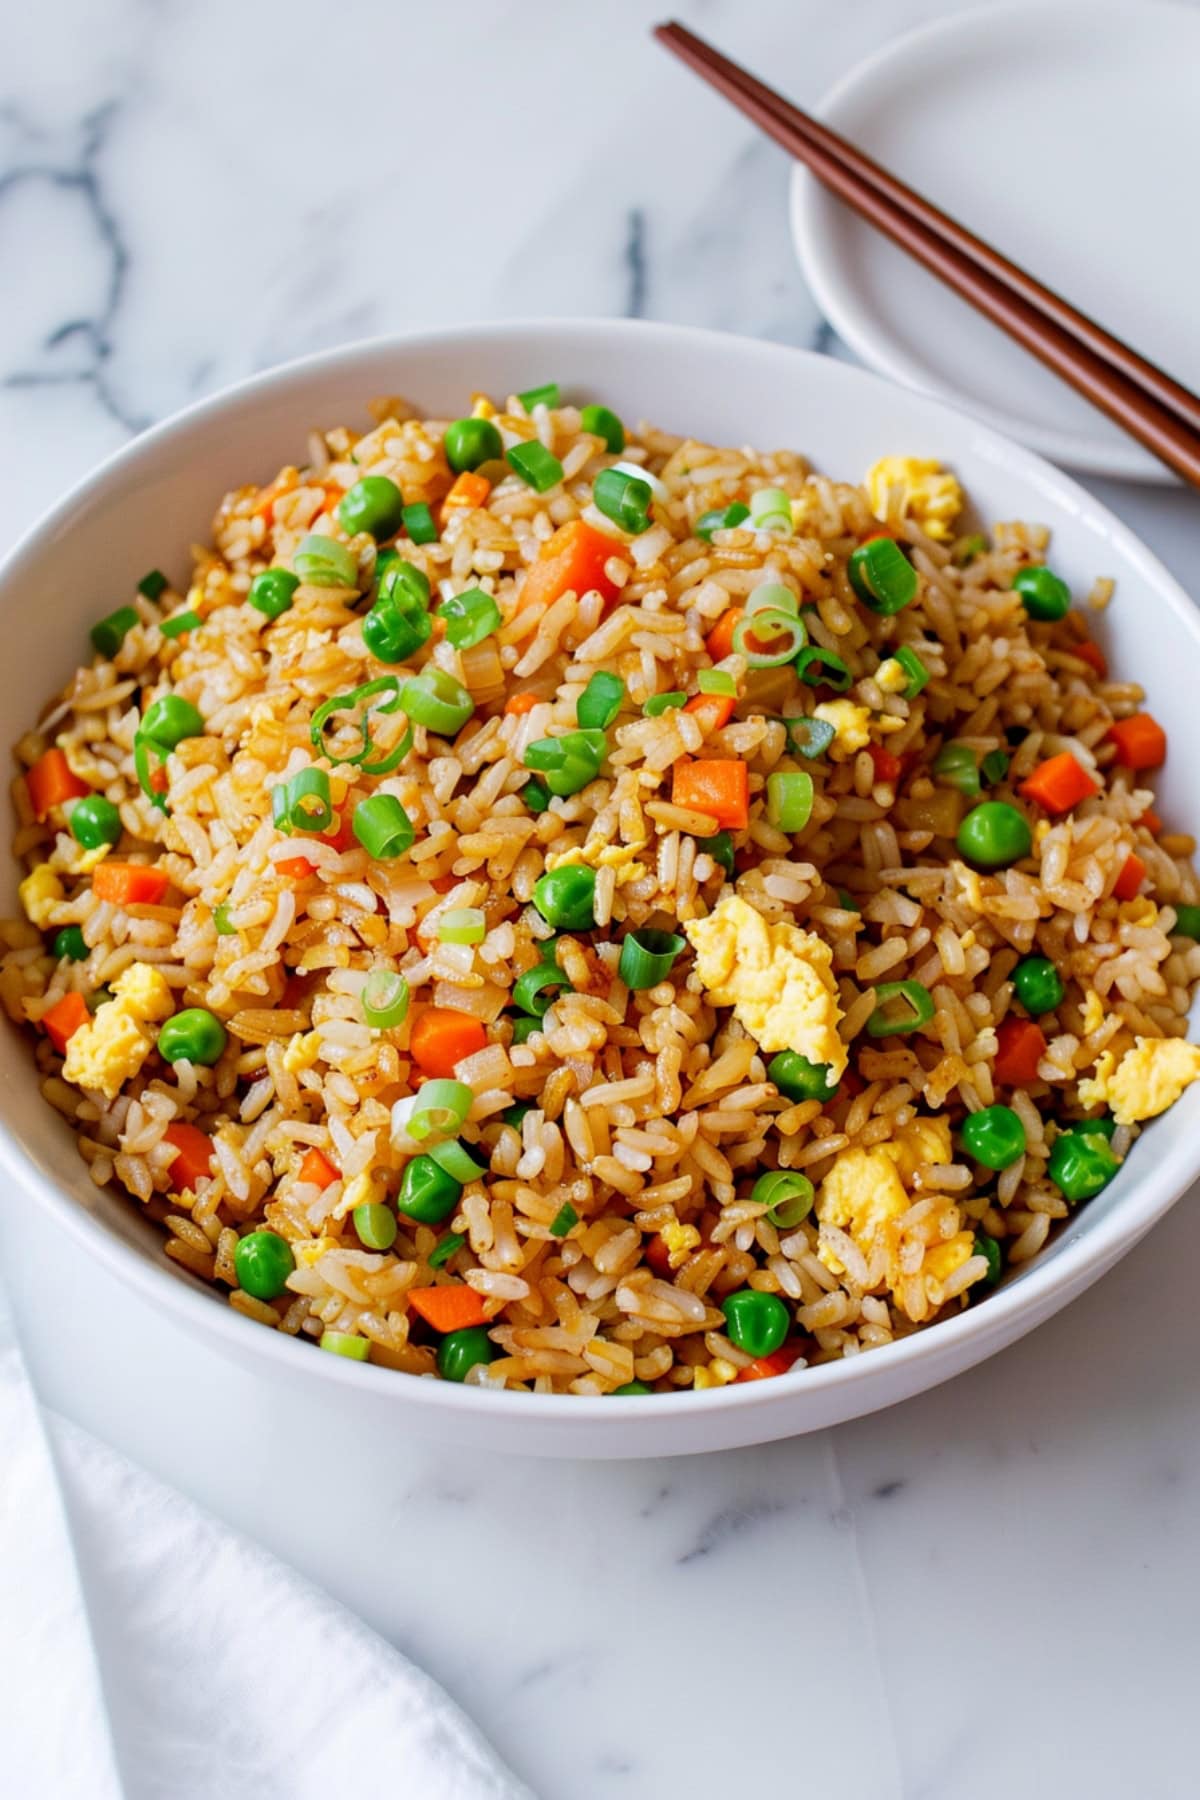 Homemade hibachi fried rice, prepared with fresh ingredients including green onions, green peas and carrots, and a touch of soy sauce for authentic flavor